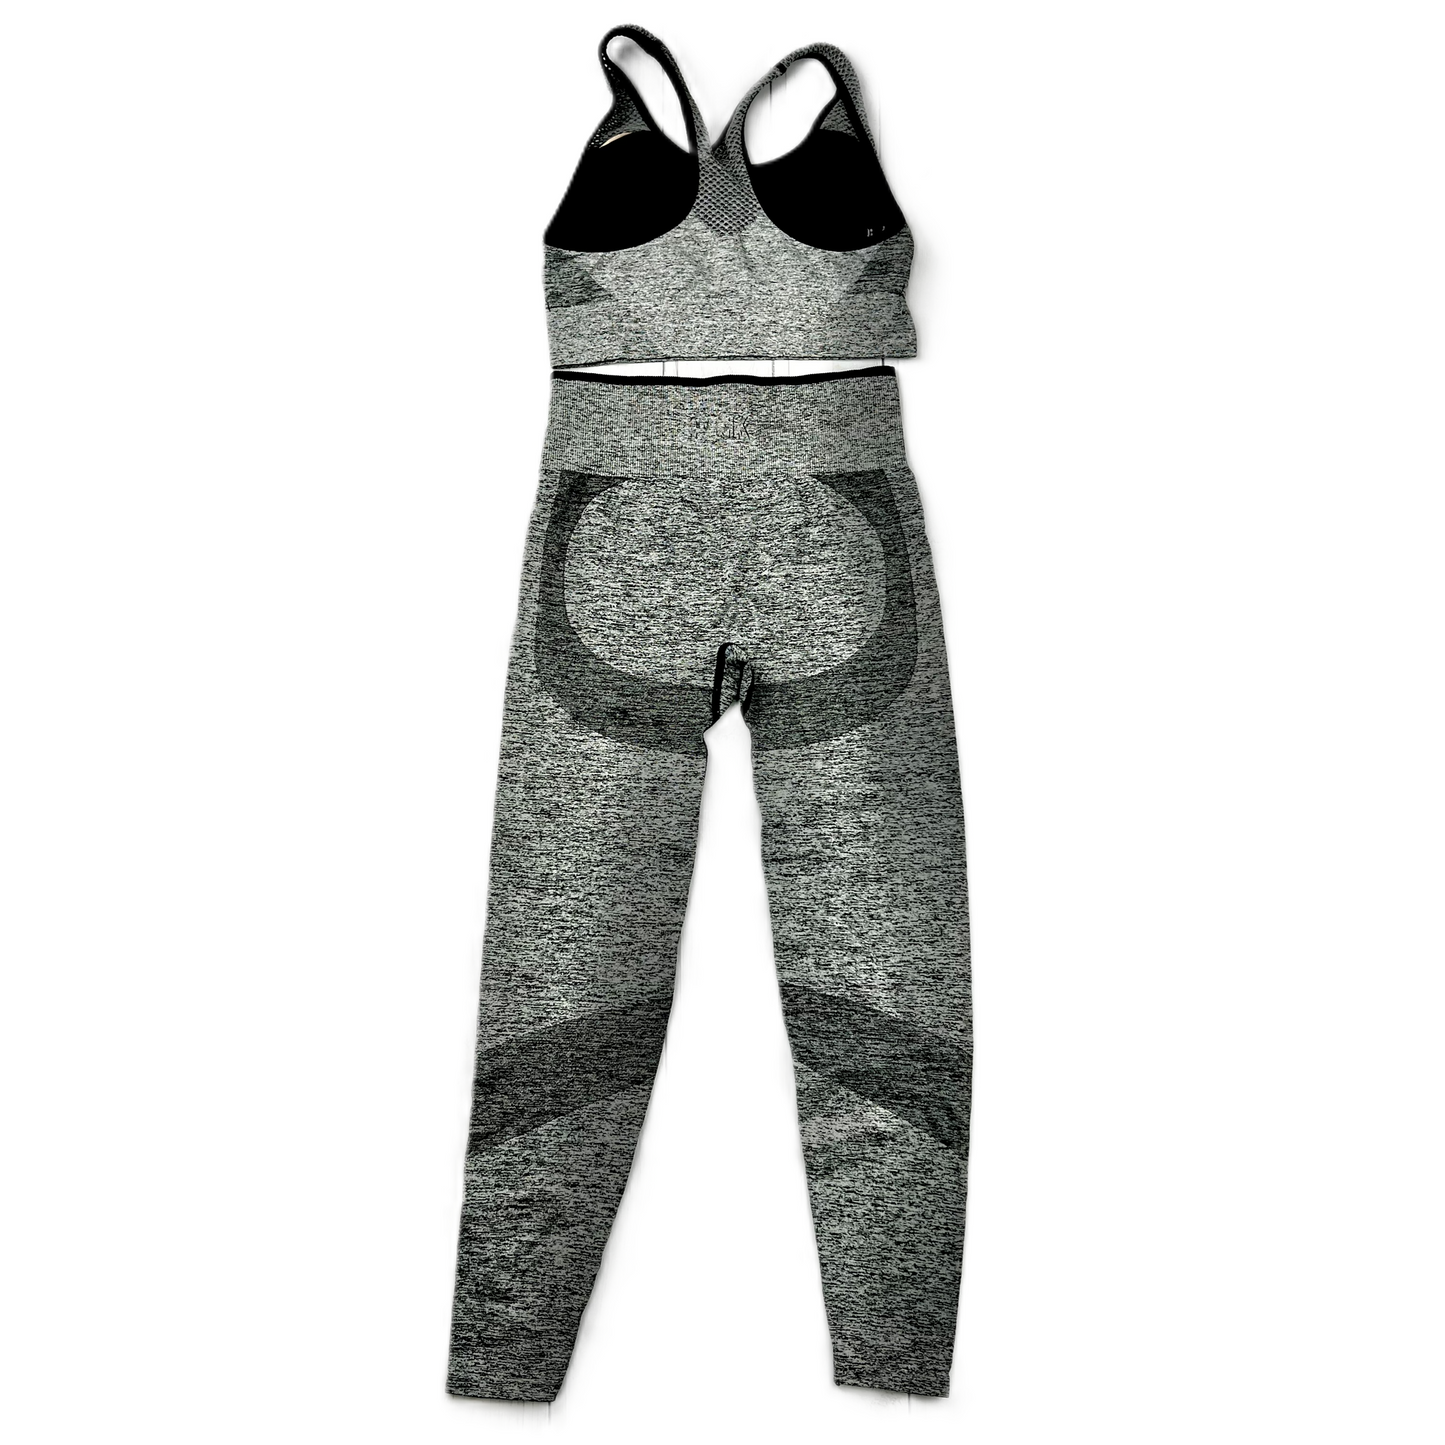 Black & Grey Athletic Pants 2pc By Pink, Size: M